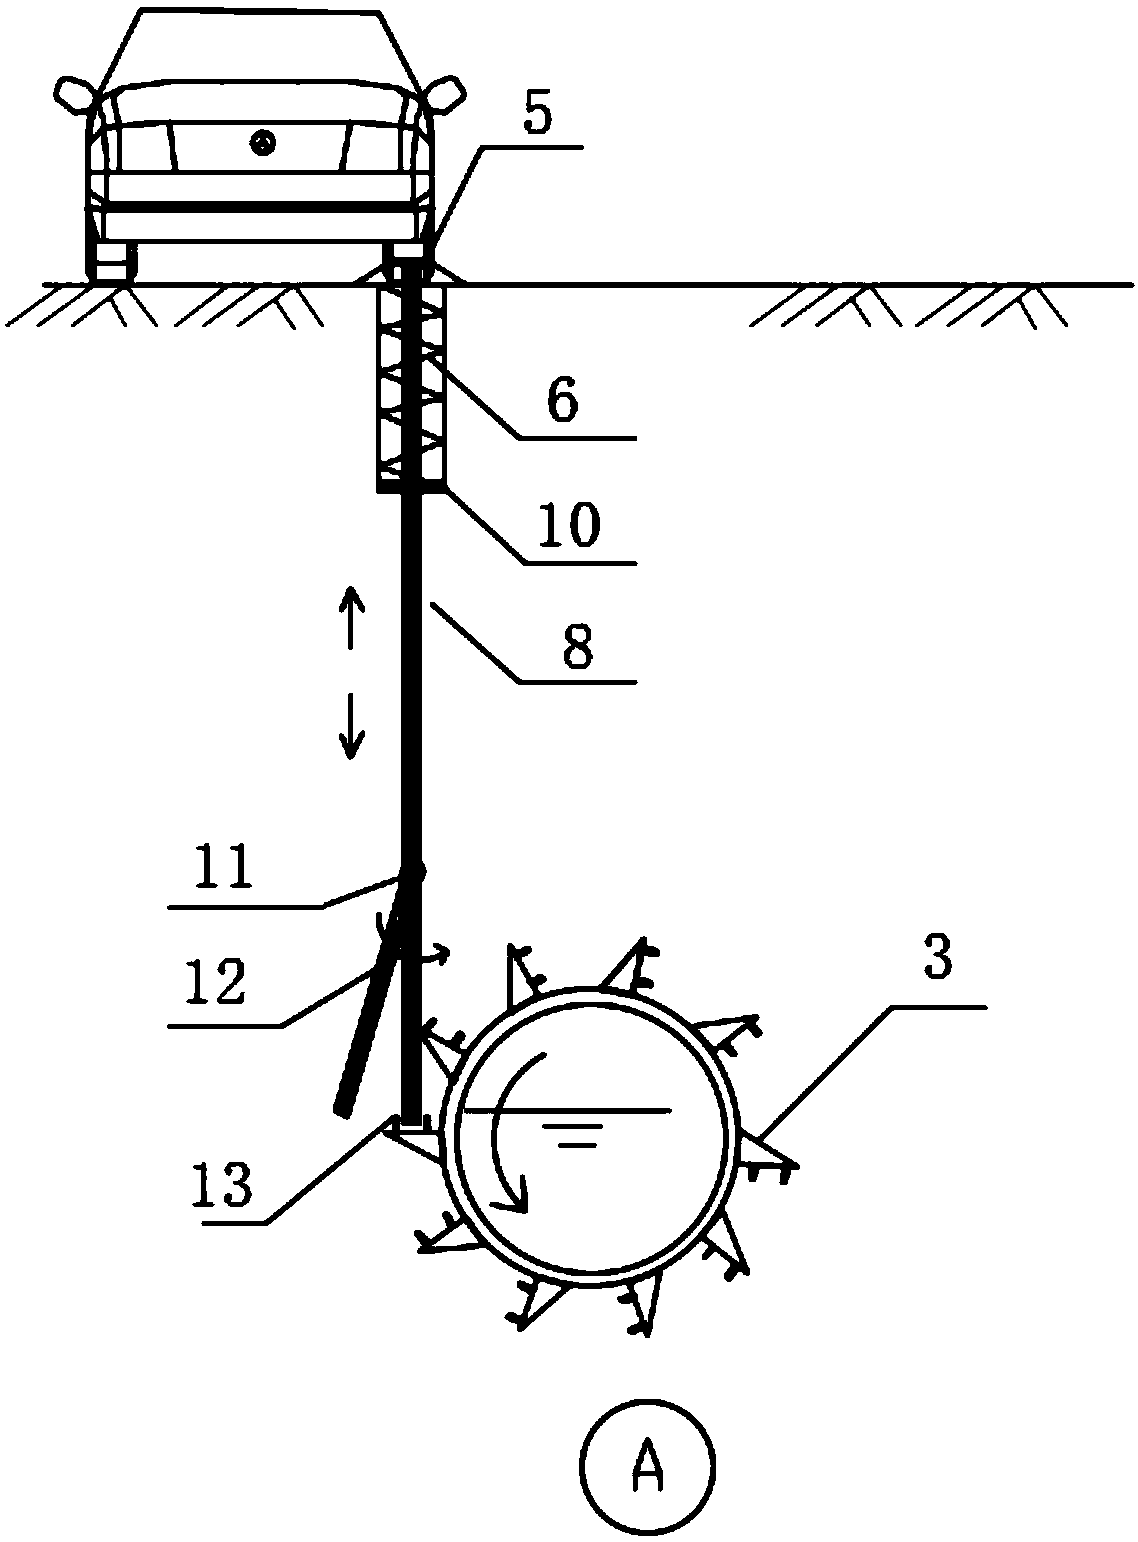 Dredging device and method suitable for drainage pipeline under urban roadway